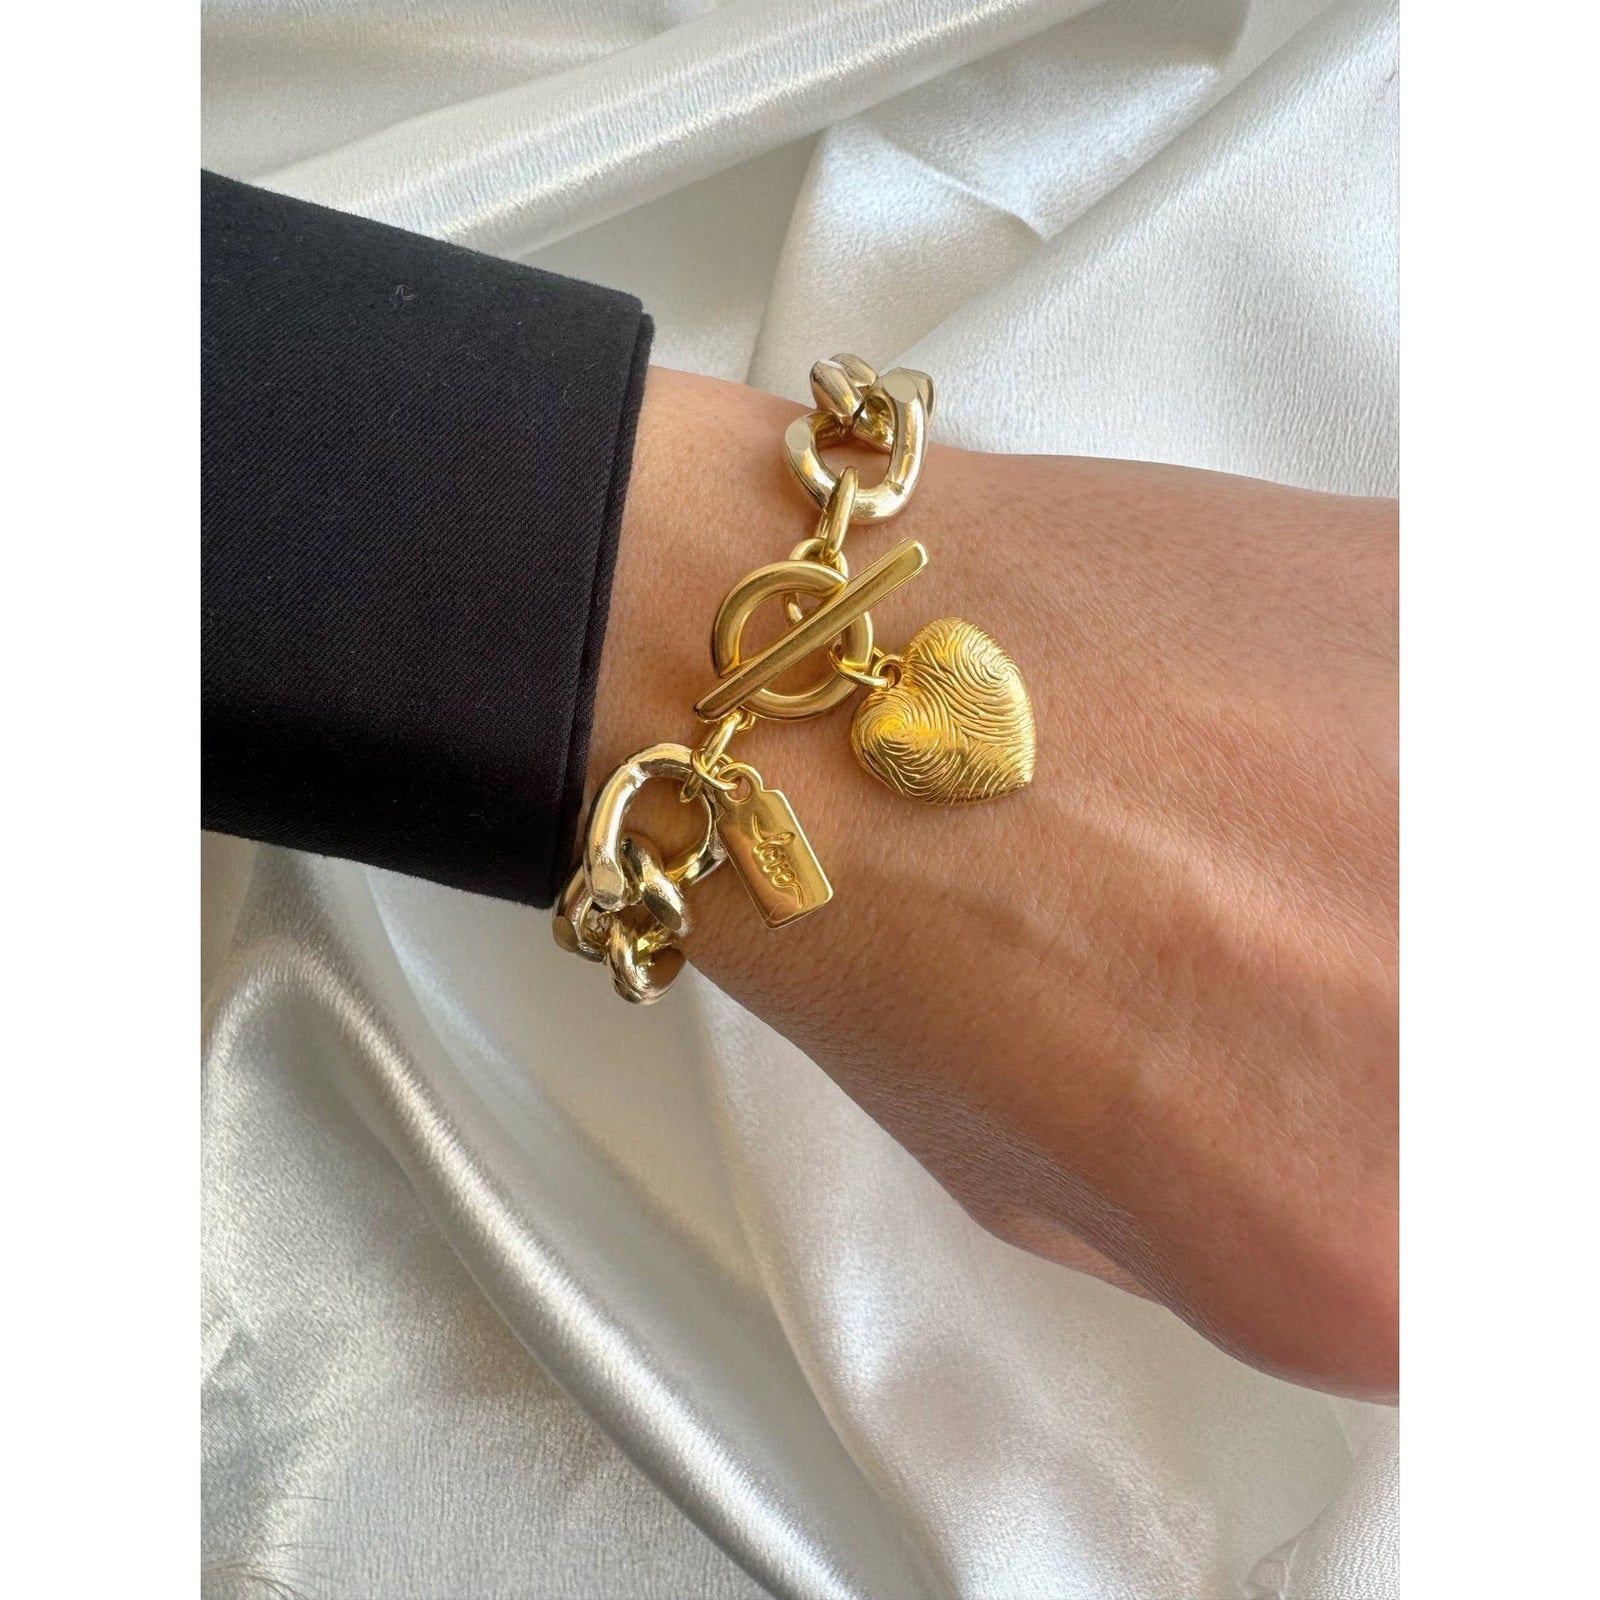 Etched Fingerprint Gold Chunky Chain Bracelet with Heart Charm | Handmade in Athens, Greece